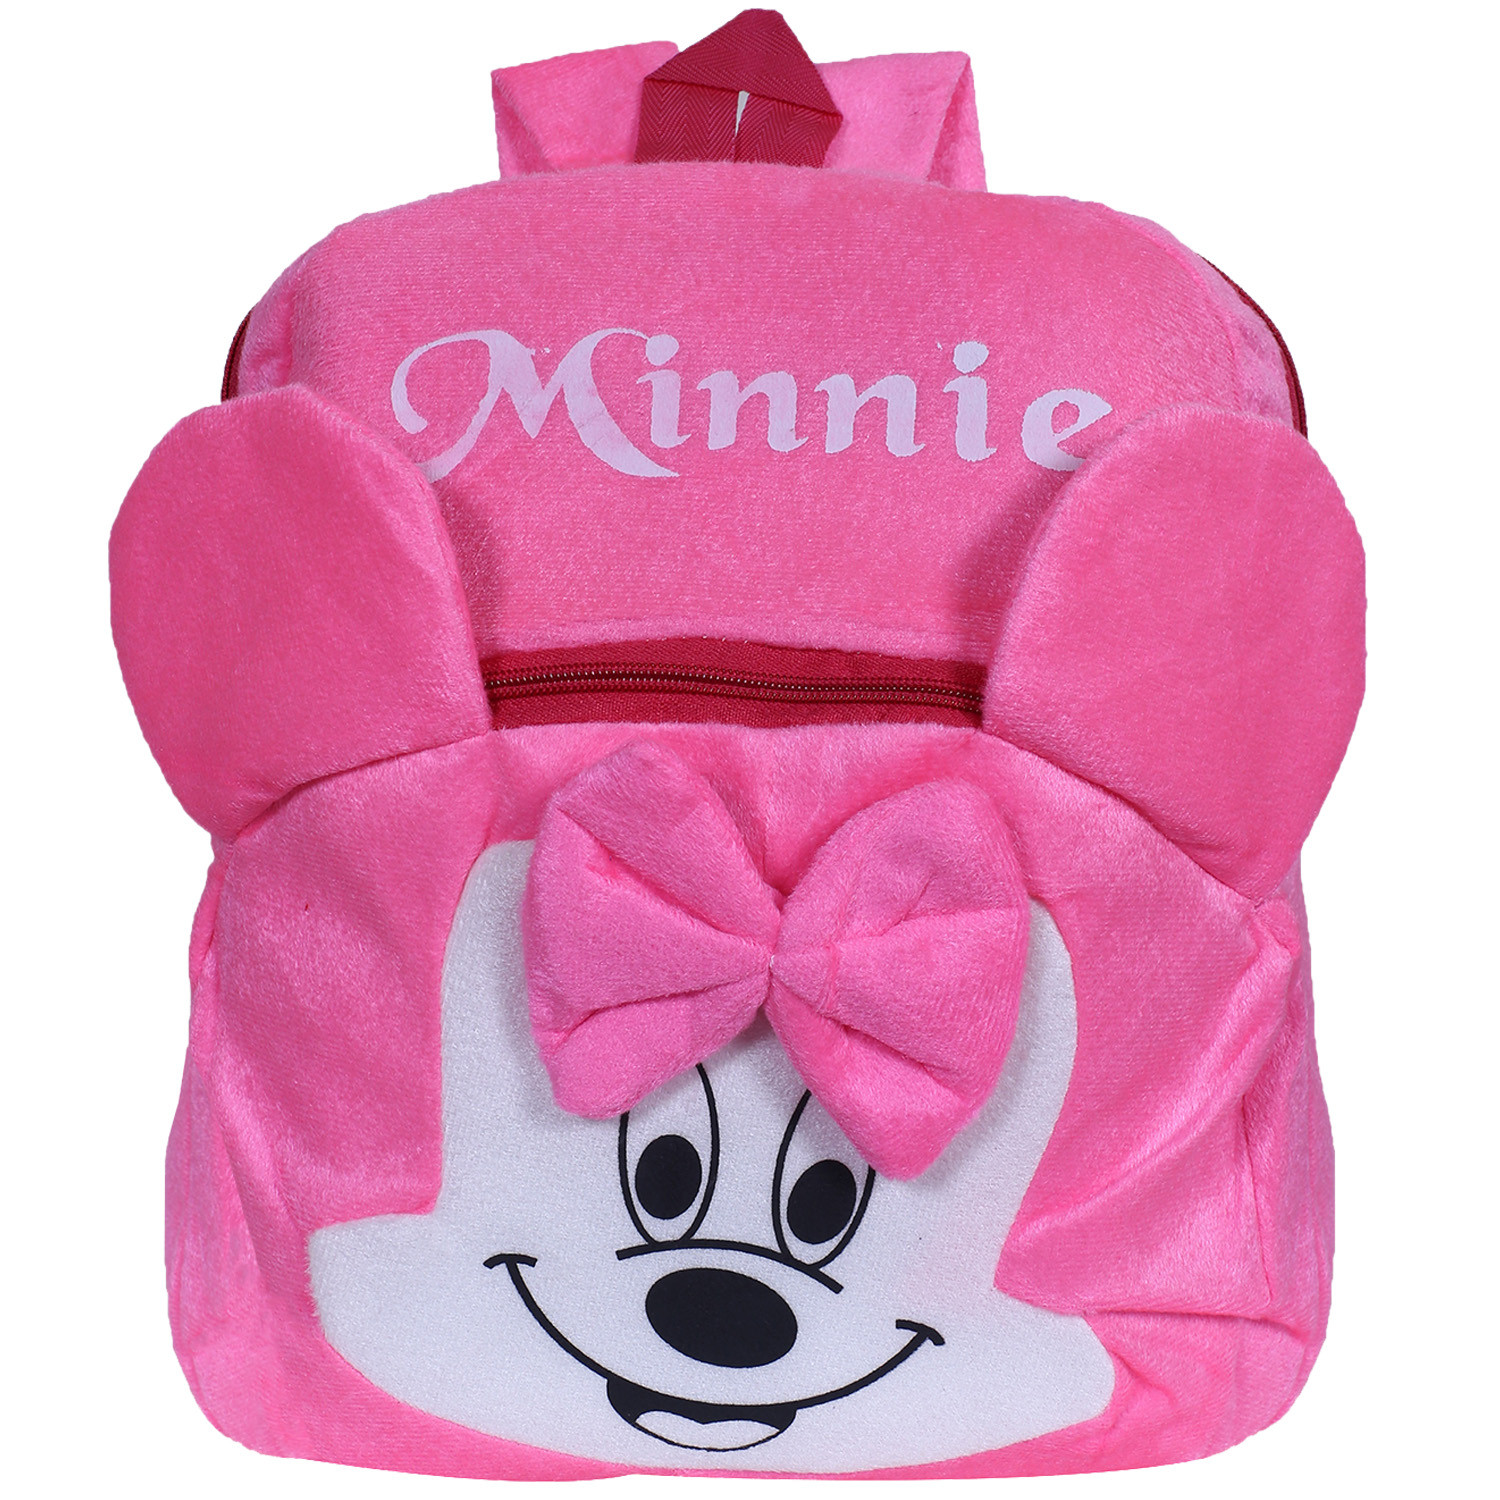 Kuber Industries Disney Minnie Face Plush Backpack|2 Compartment Stitched Velvet School Bag|Durable Toddler Haversack For Travel,School with Zipper Closure (Pink)